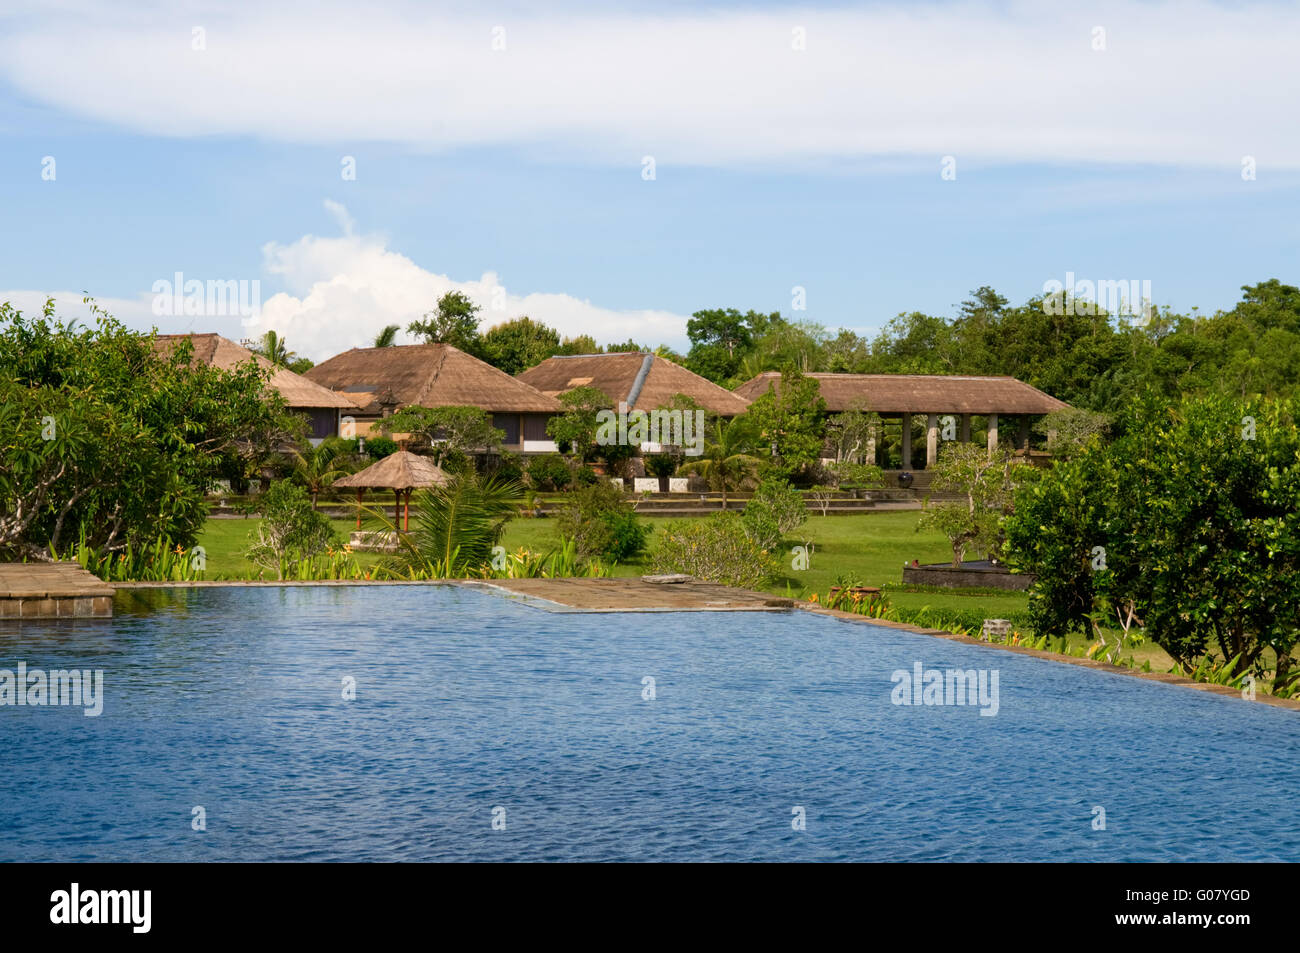 Villas and swimming pool in green field of India Stock Photo